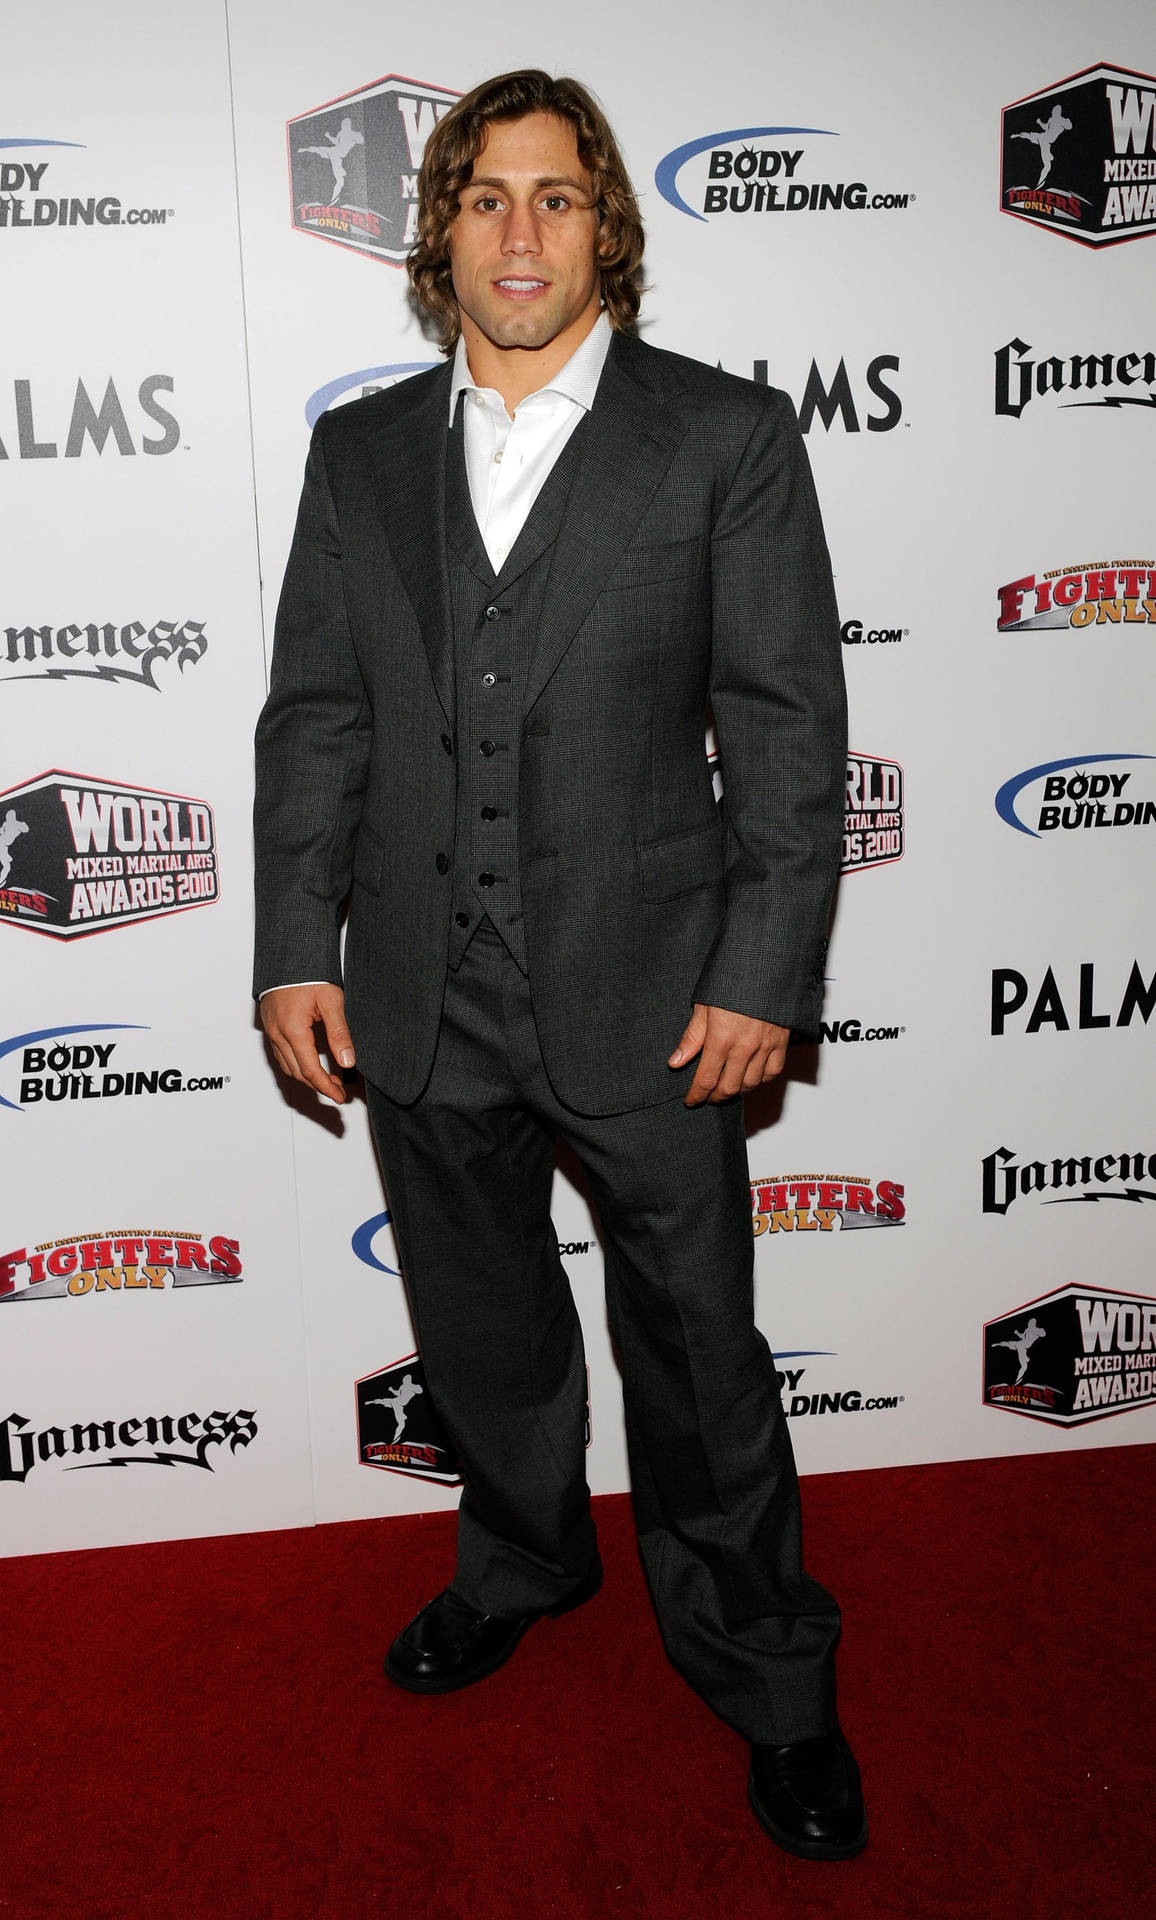 Urijah Faber flaunting his charismatic aura on the Red Carpet Wallpaper